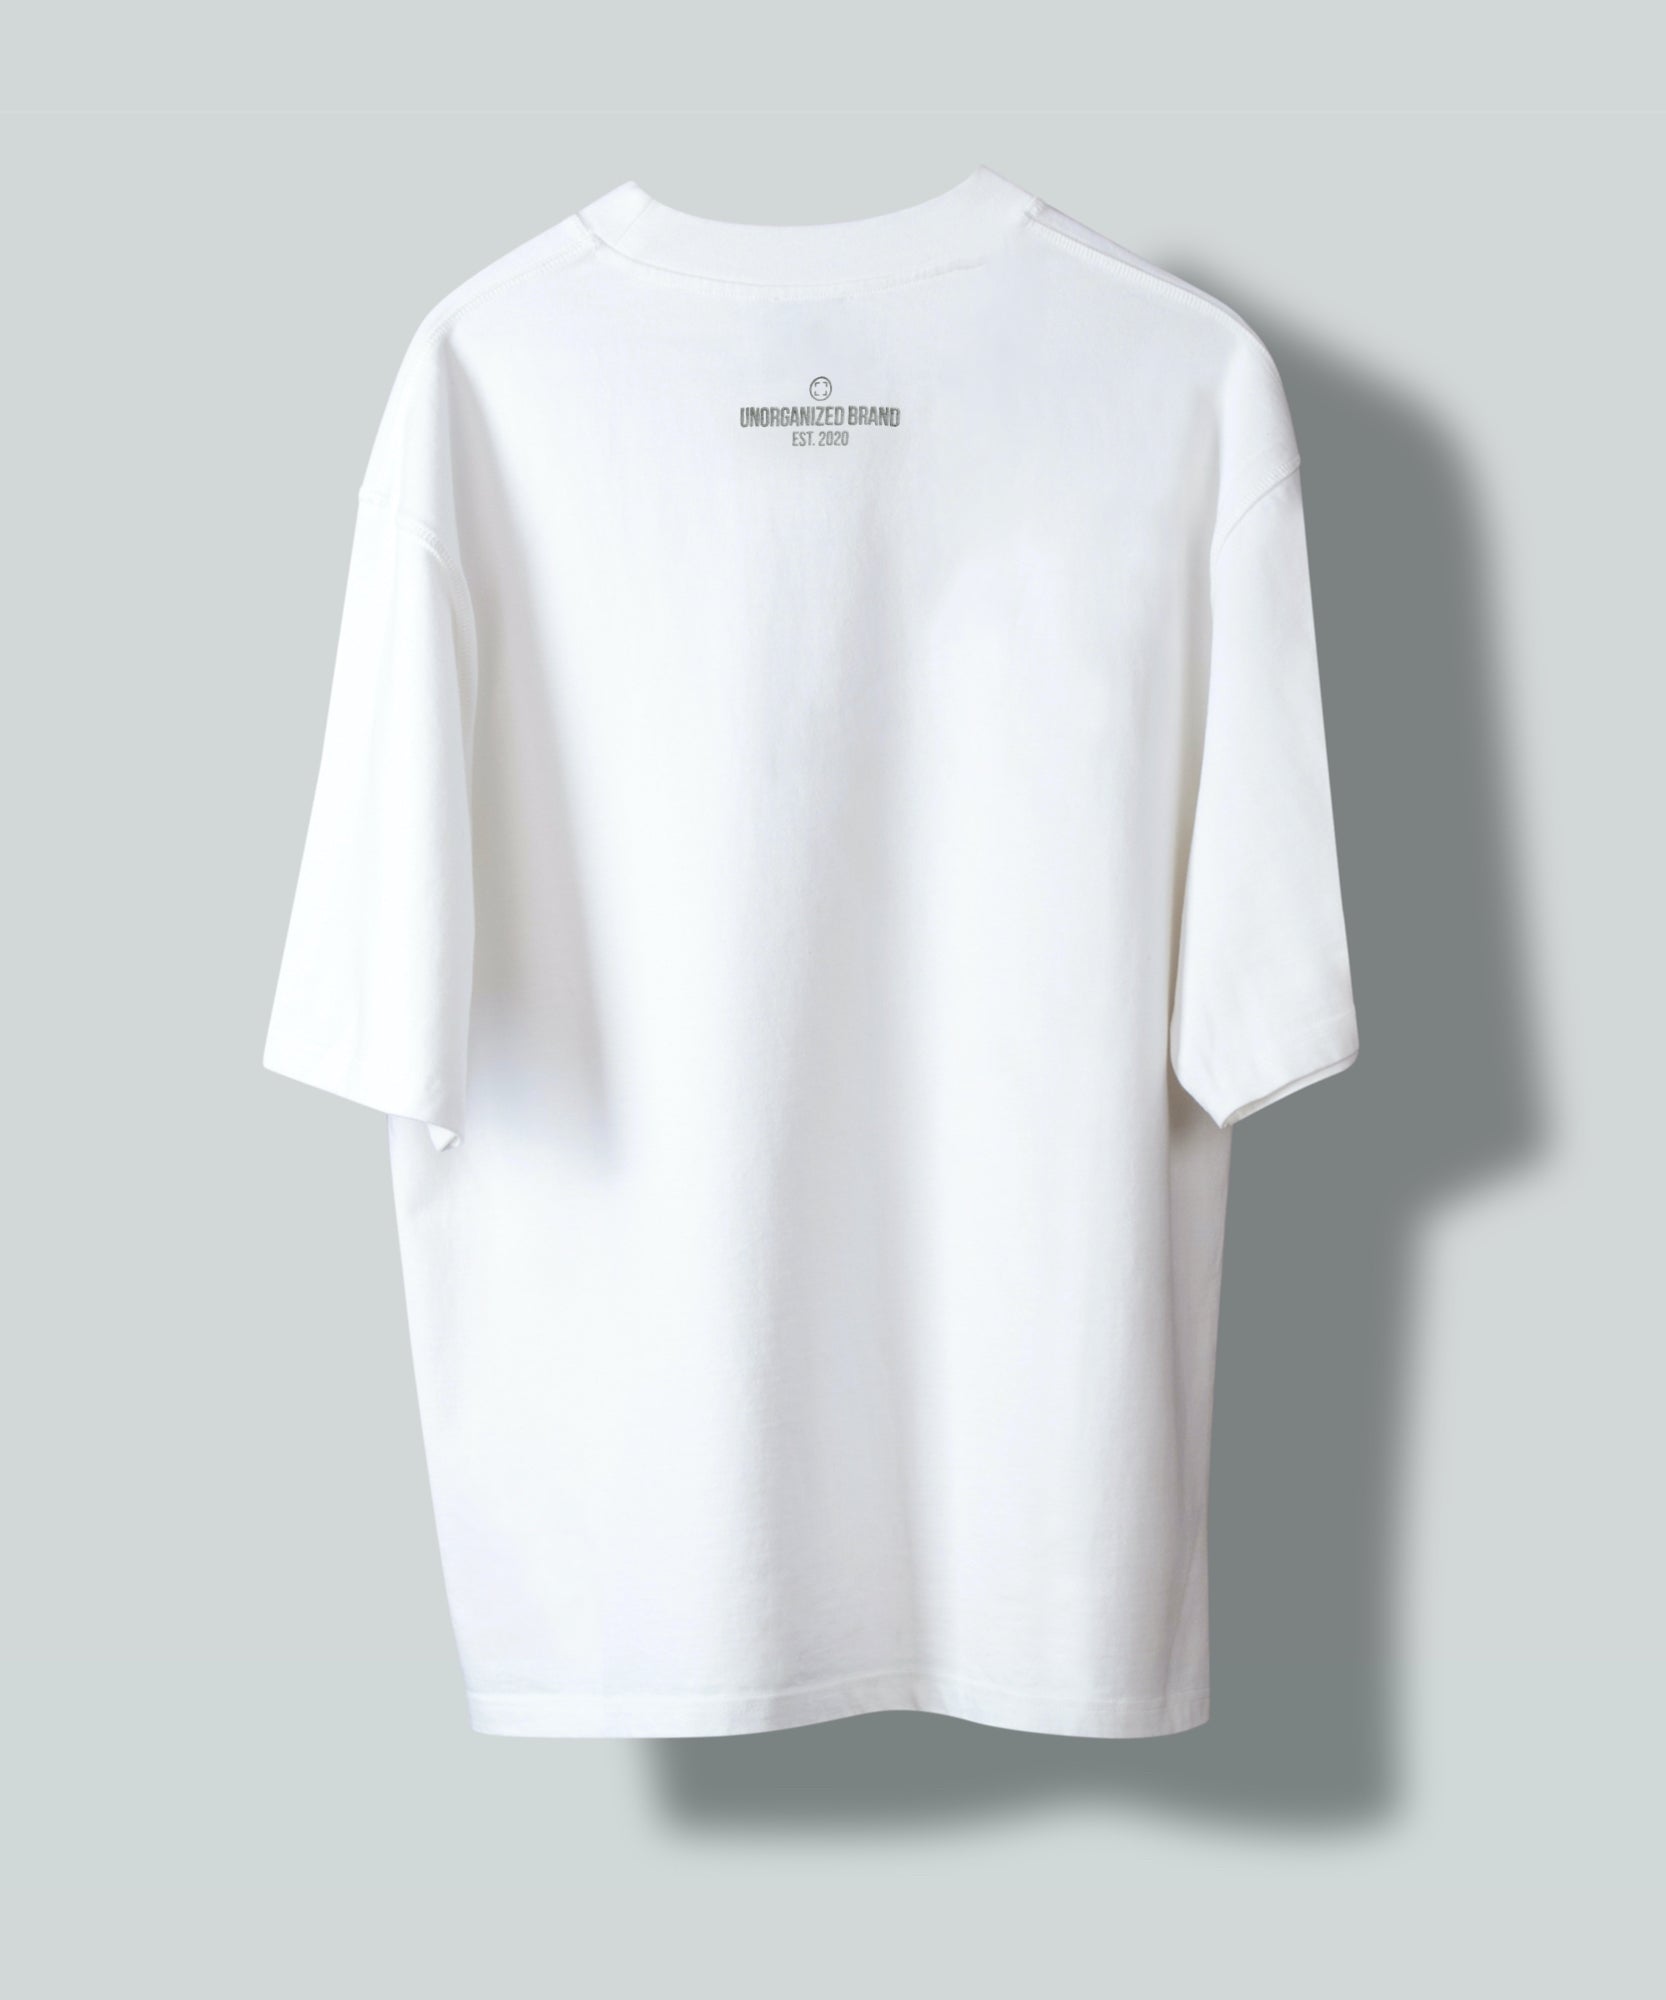 DOUBLE-PACK OVERSIZE T-SHIRT "T5" MIX